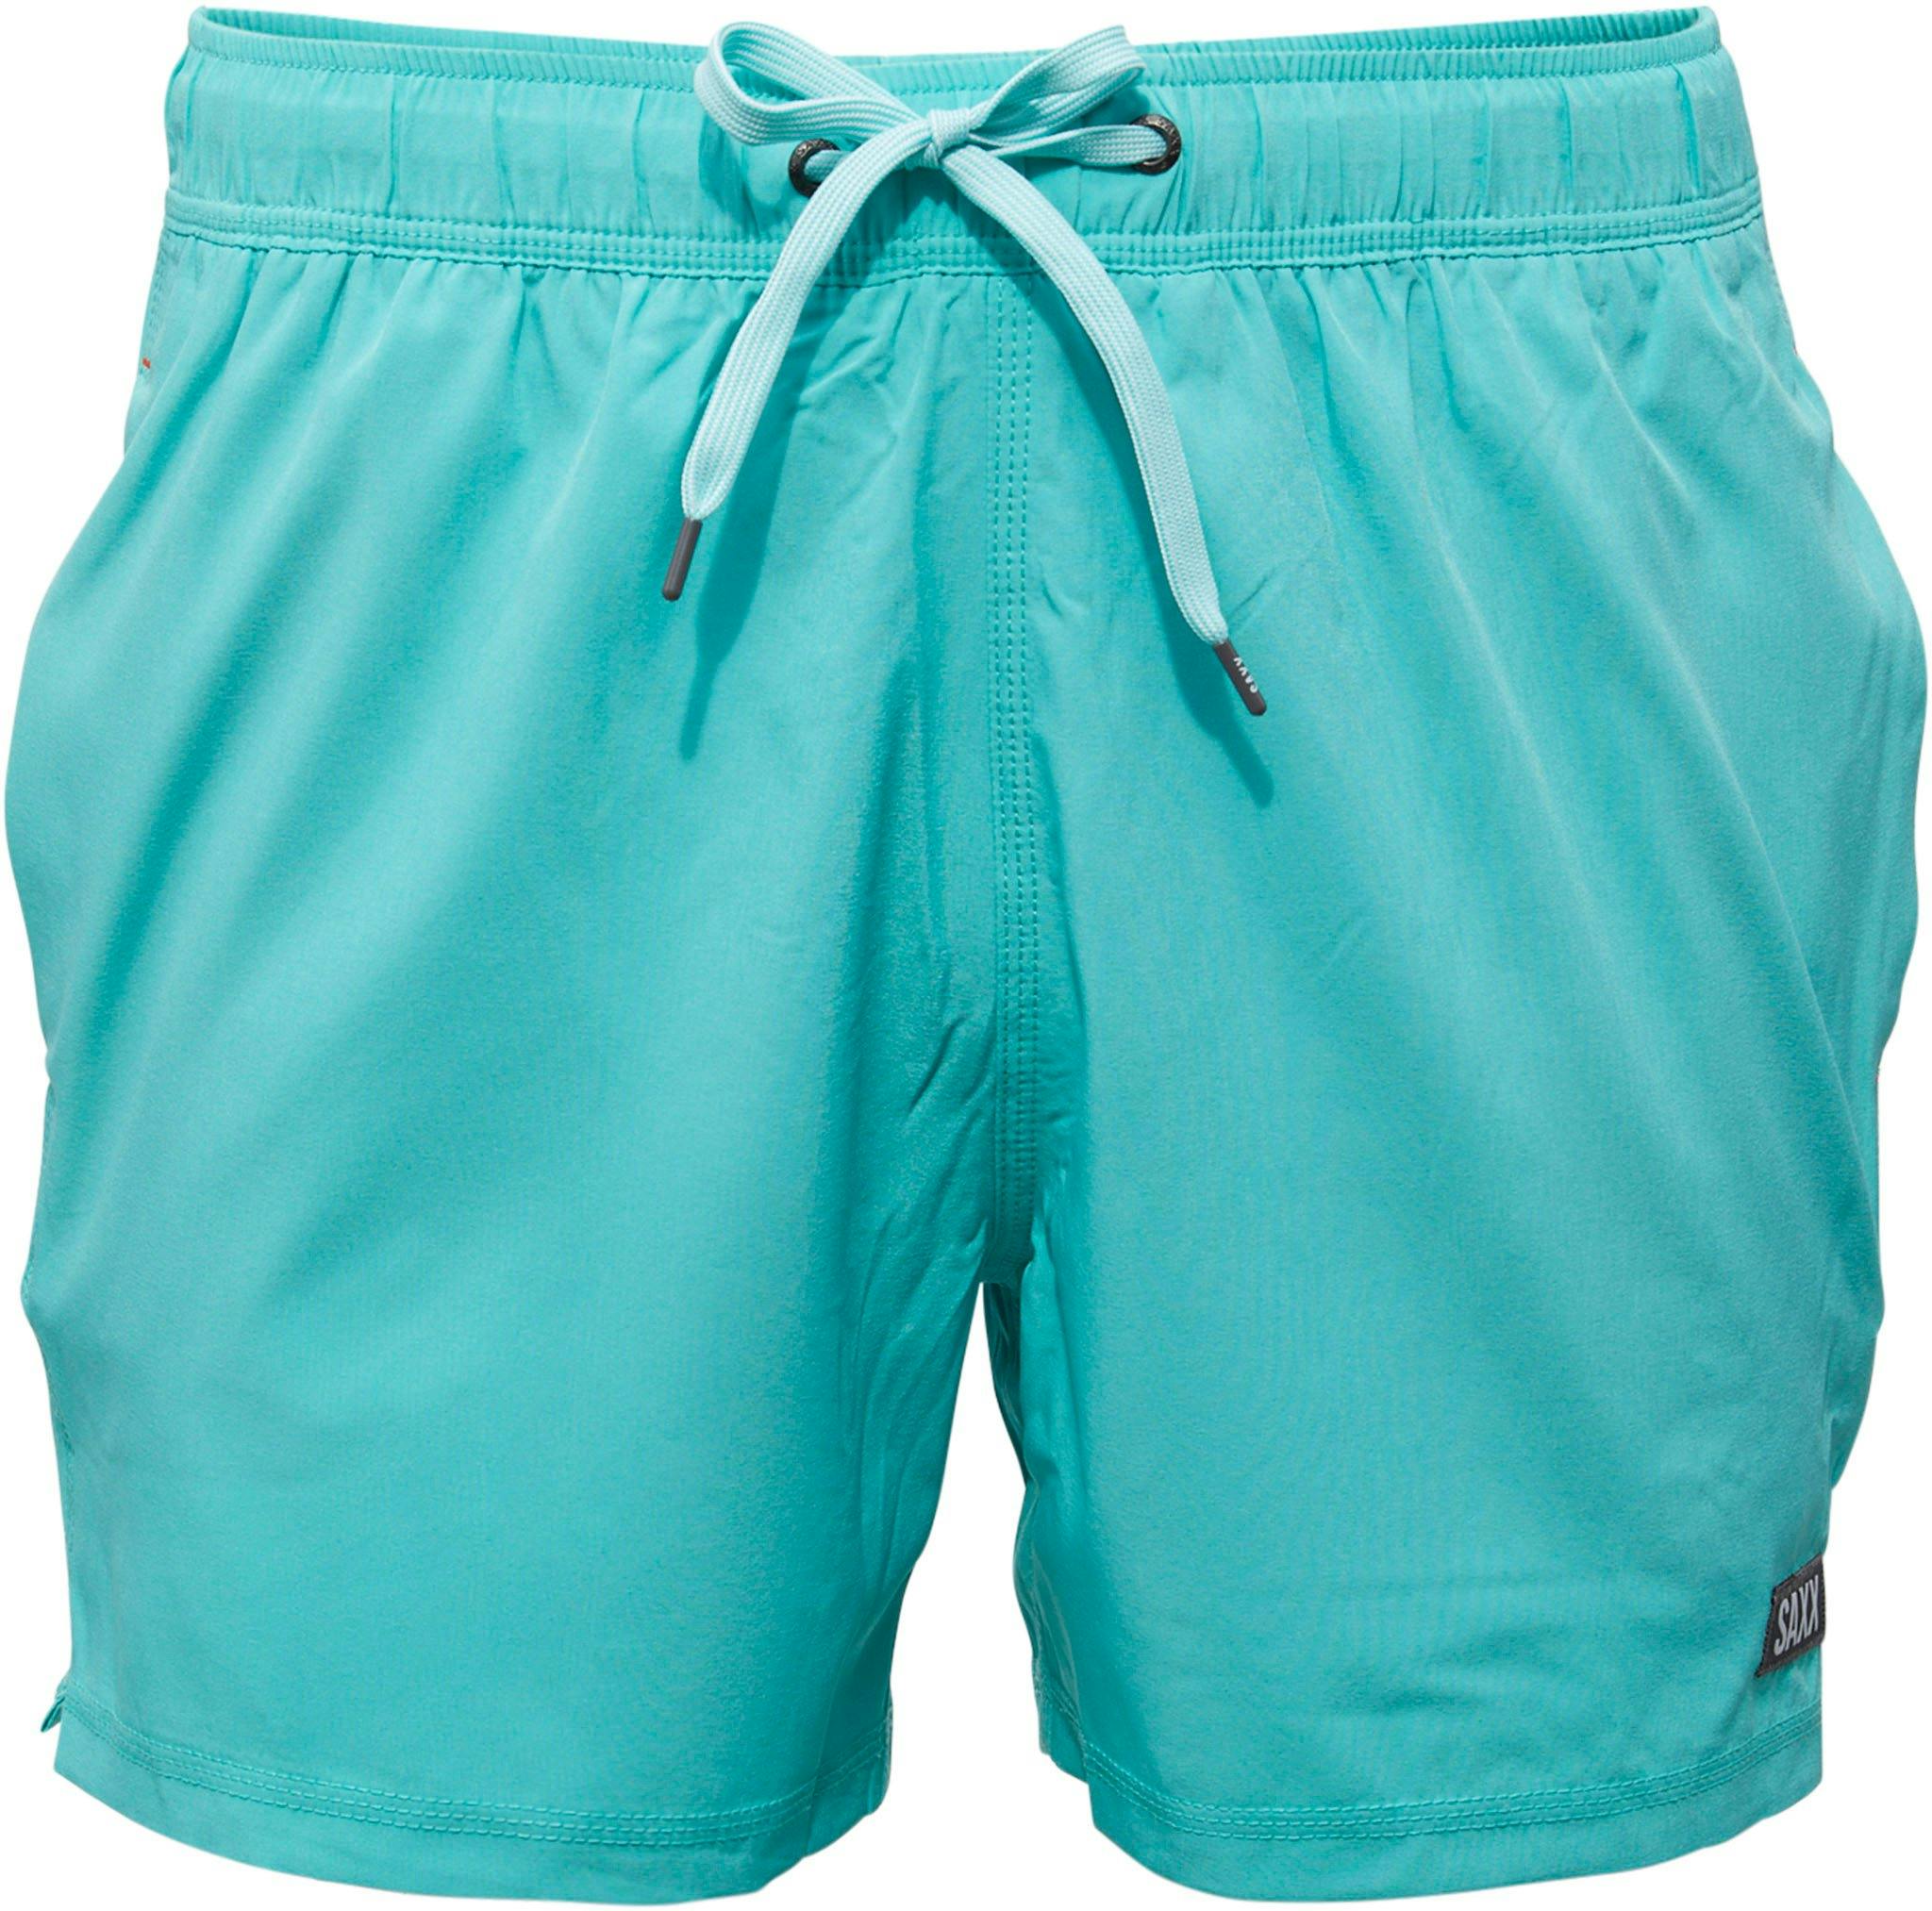 Product image for Oh Buoy 2N1 Volley 5 Inches Swim Shorts - Men's